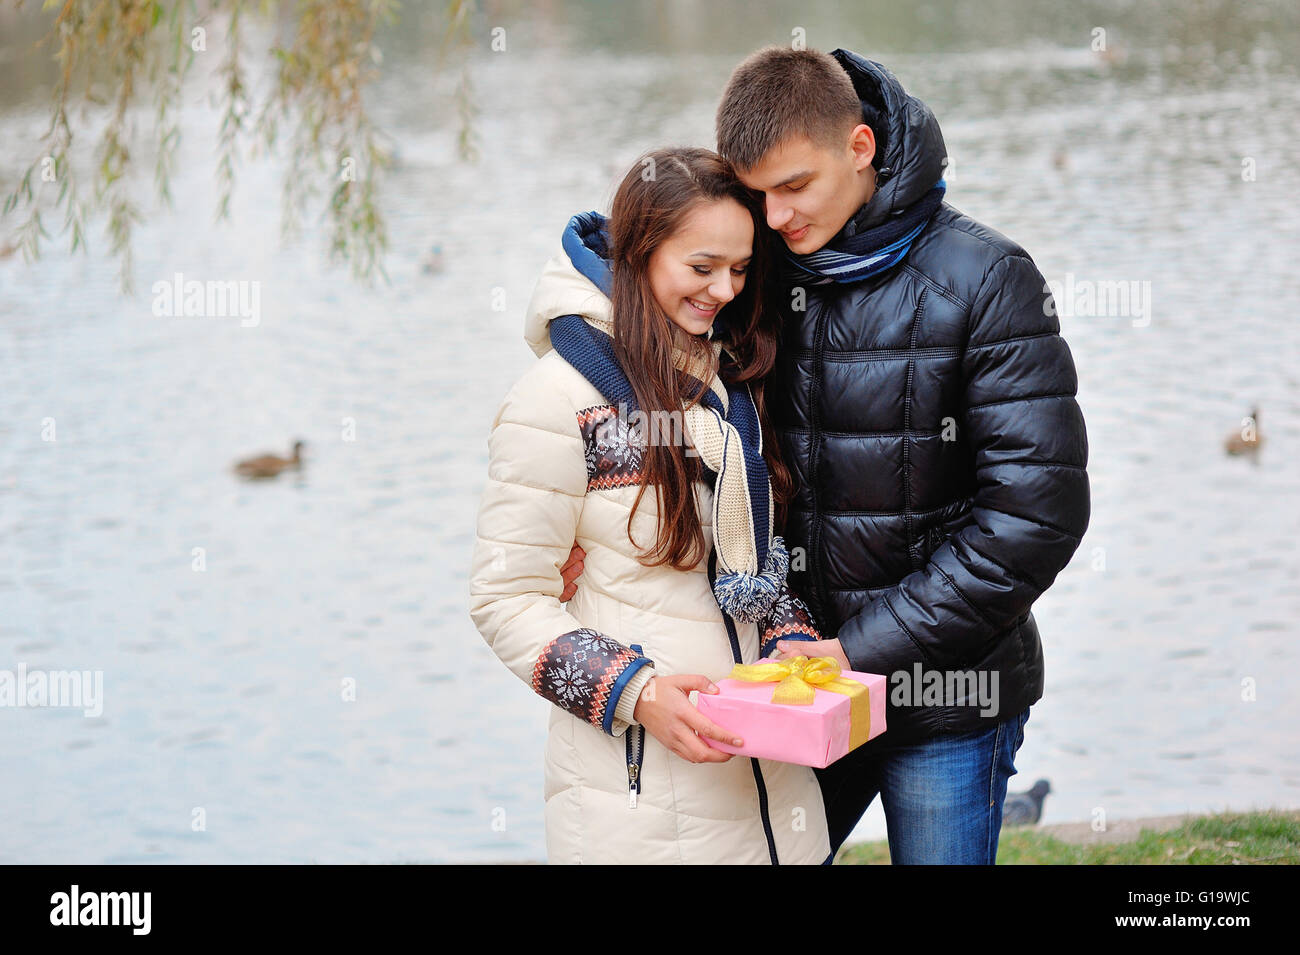 The young man gives a gift to a young girl in the cafe and they Stock Photo